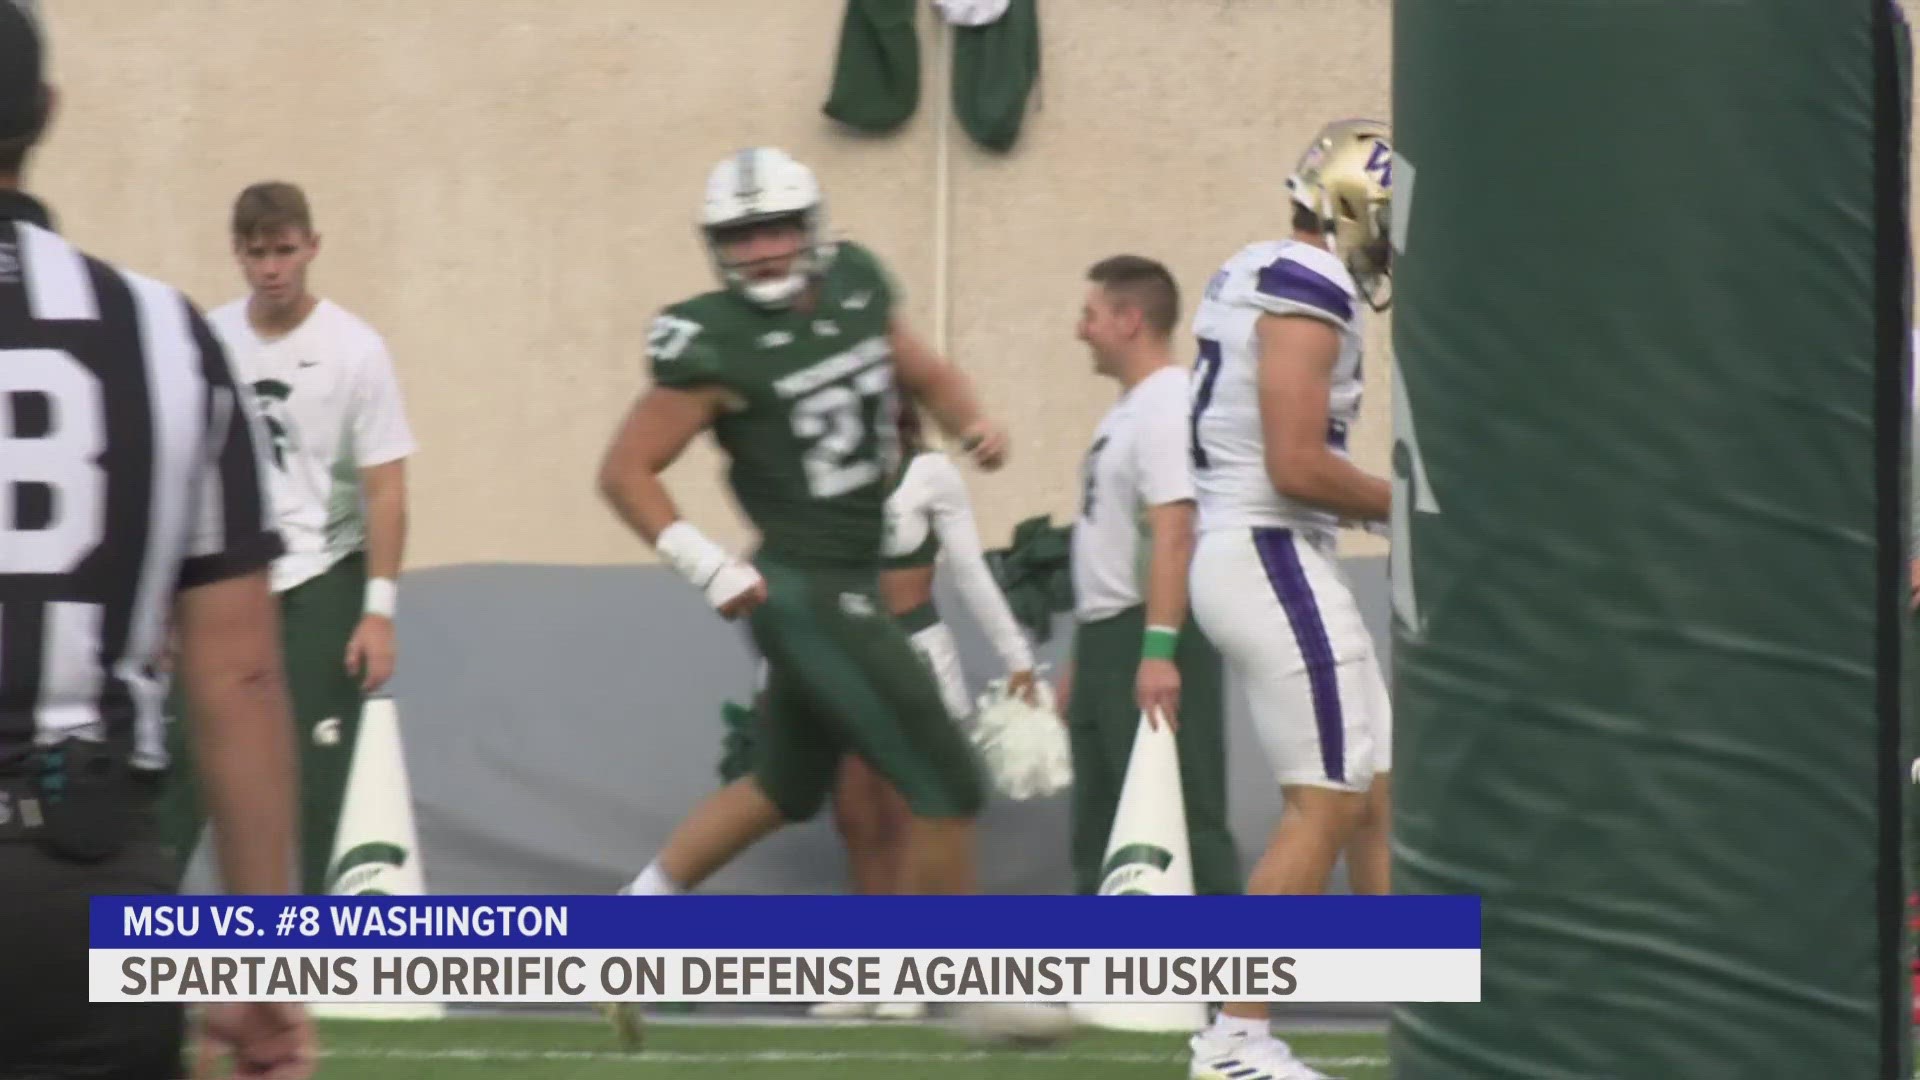 Penix and the No. 8 Huskies gave a glimpse of its offensive explosiveness Saturday with a 41-7 win over Michigan State.